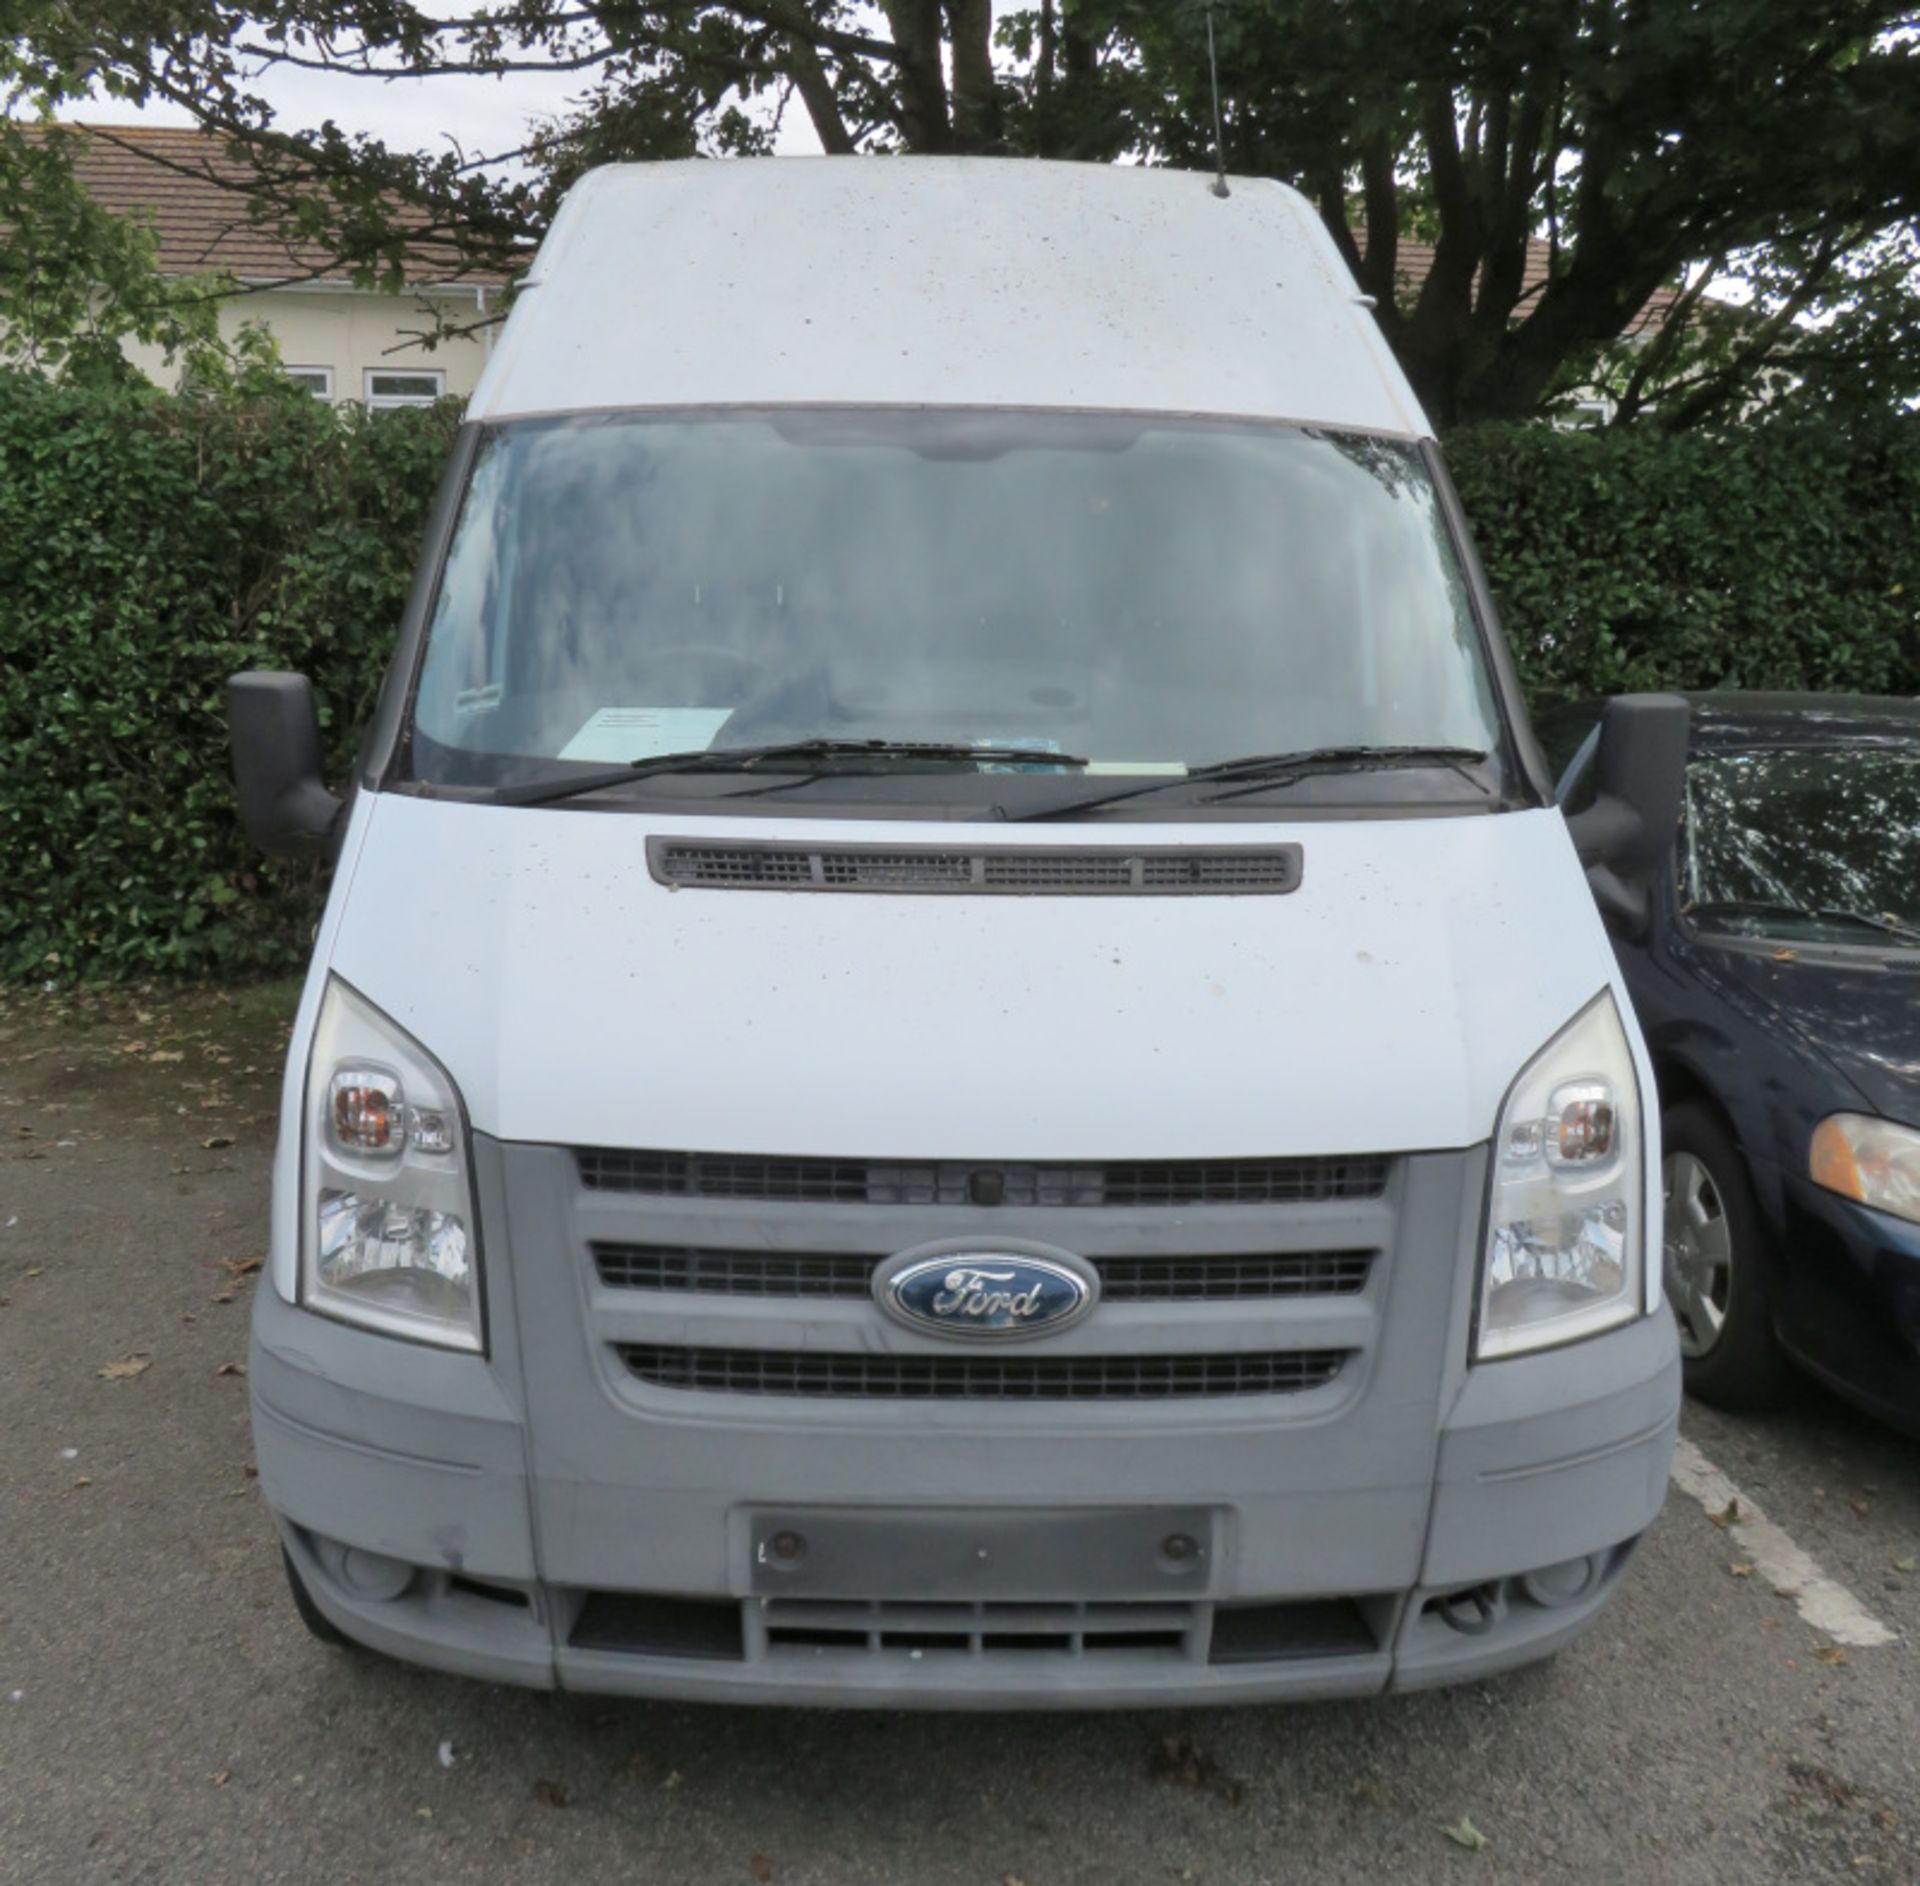 Ford Transit High Van Roof, Petrol, Mileage 33357 mile, Air conditioning, Runs & drives well on - Image 2 of 21